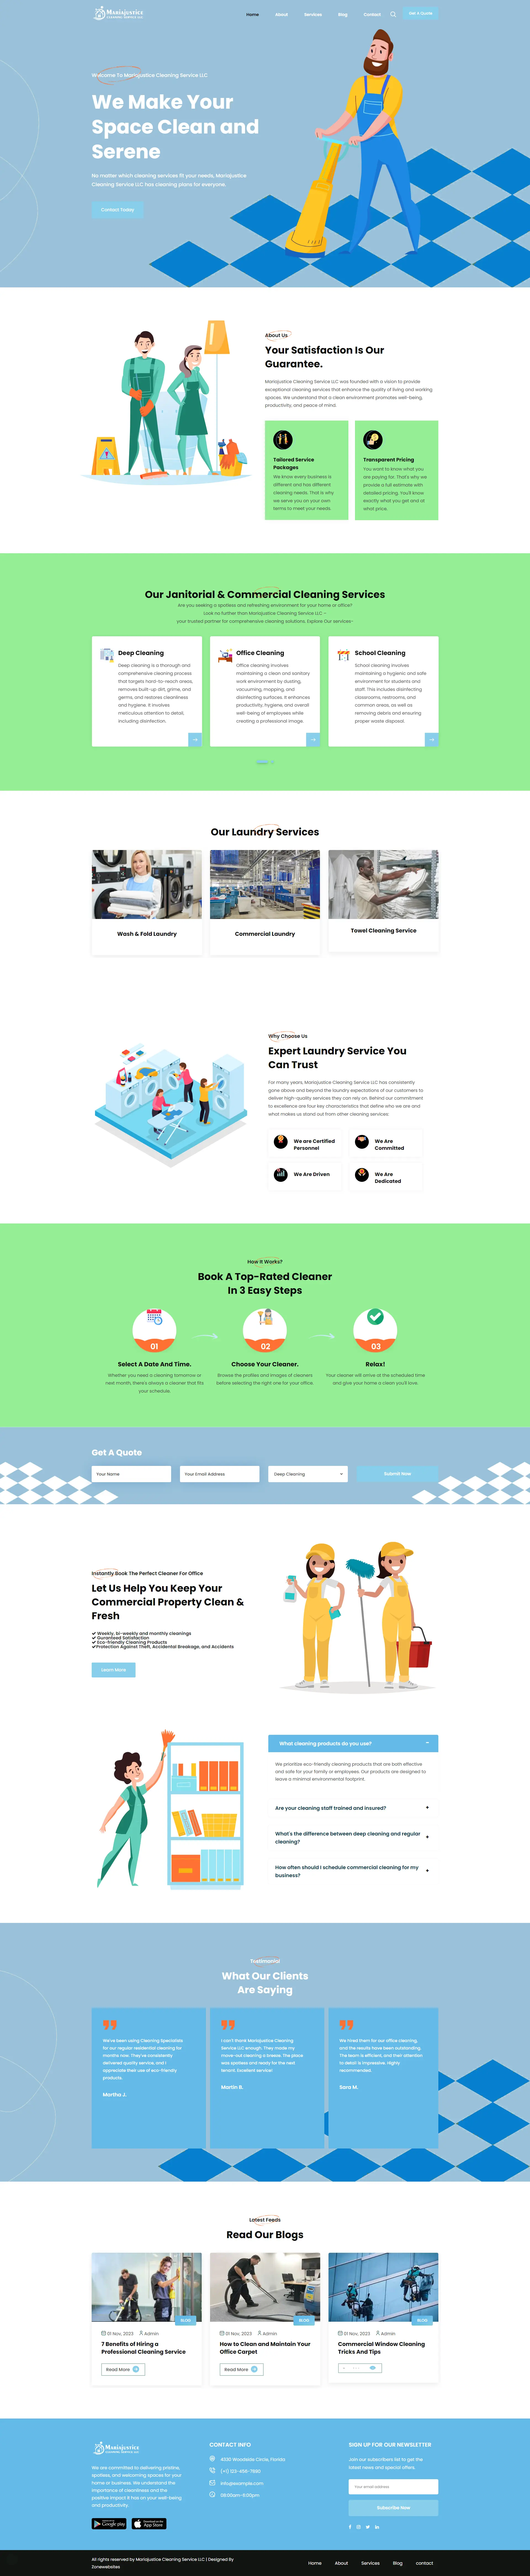 Mariajustice - Home Cleaning  Services Template